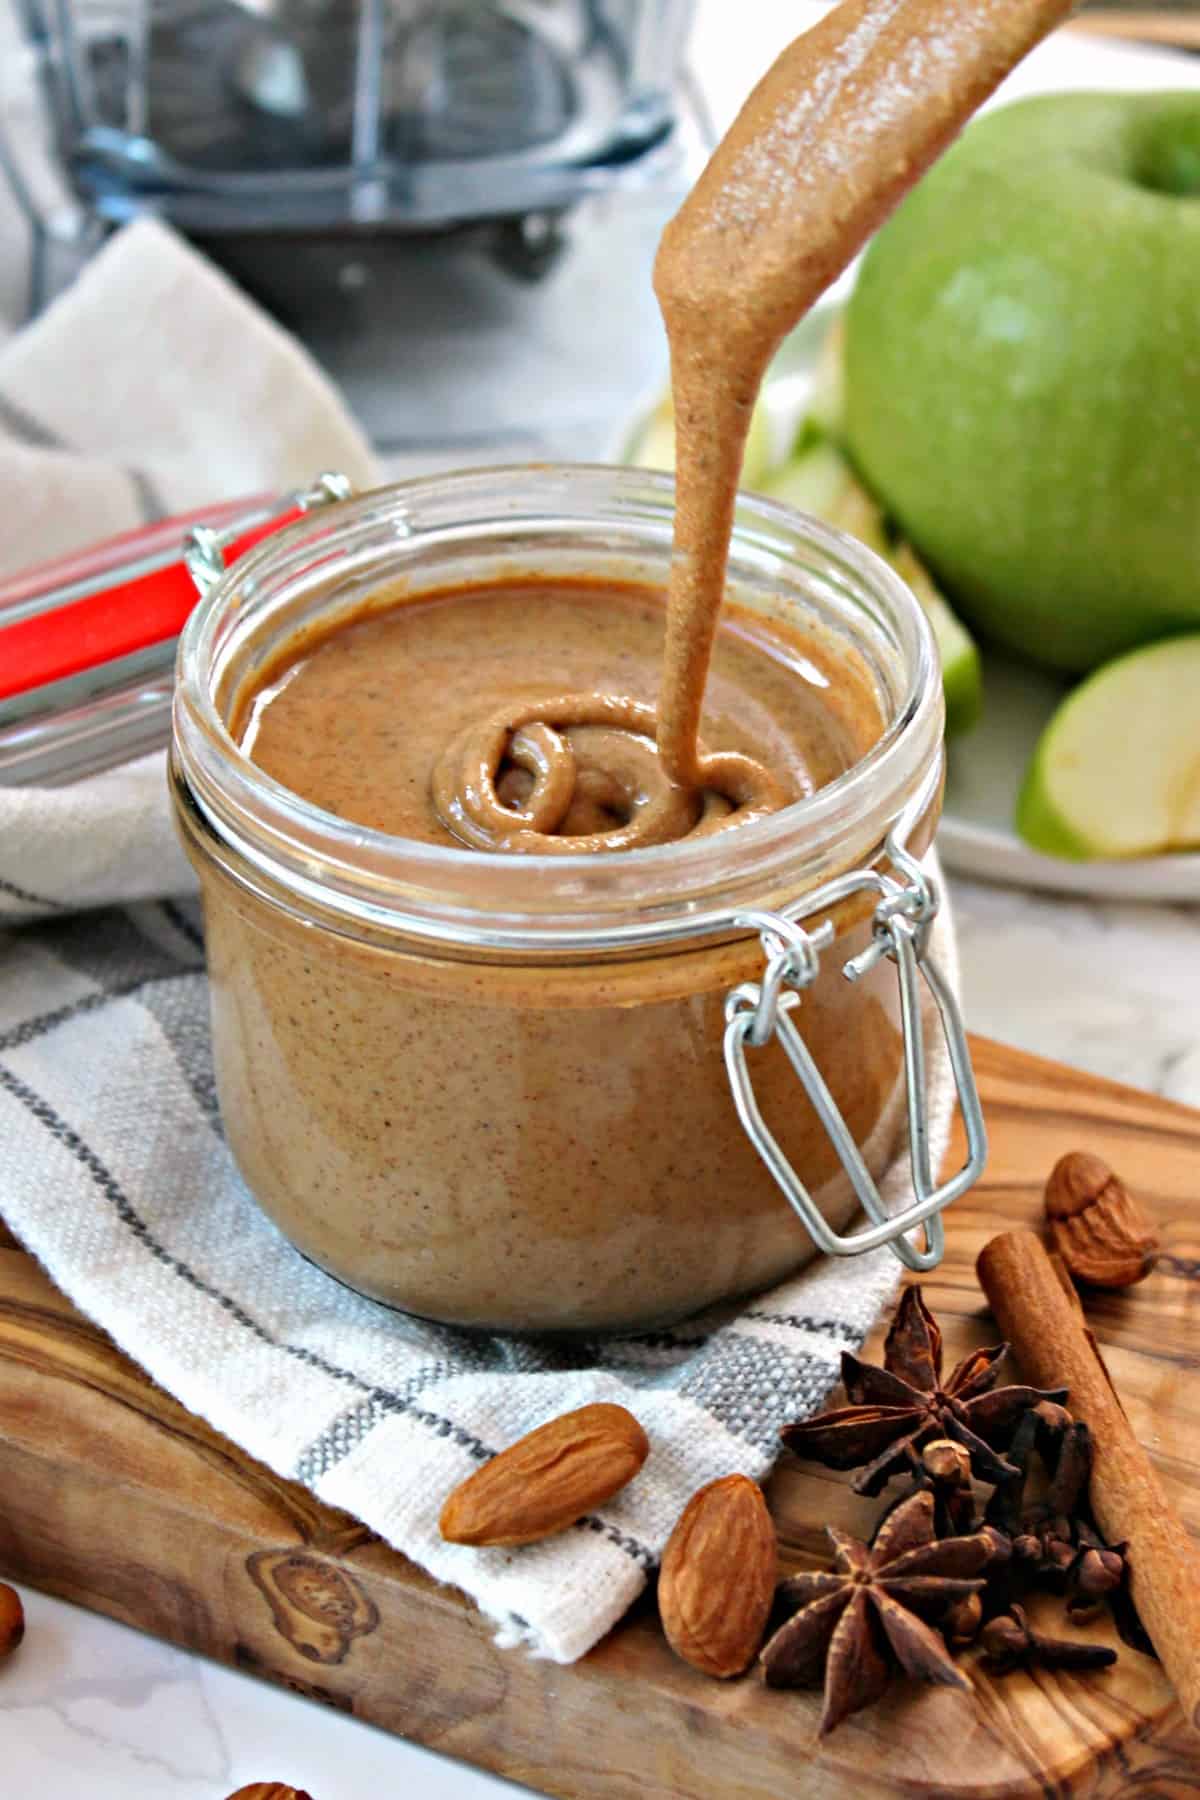 Vanilla Chai Almond Butter! This creamy blend of almonds, tantalizing spices & sweet vanilla is totally addictive... and it's made in just minutes using your high speed blender! This nut butter recipe can be customized using your favorite nut and is pure perfection slathered on toast, muffins or fruit!